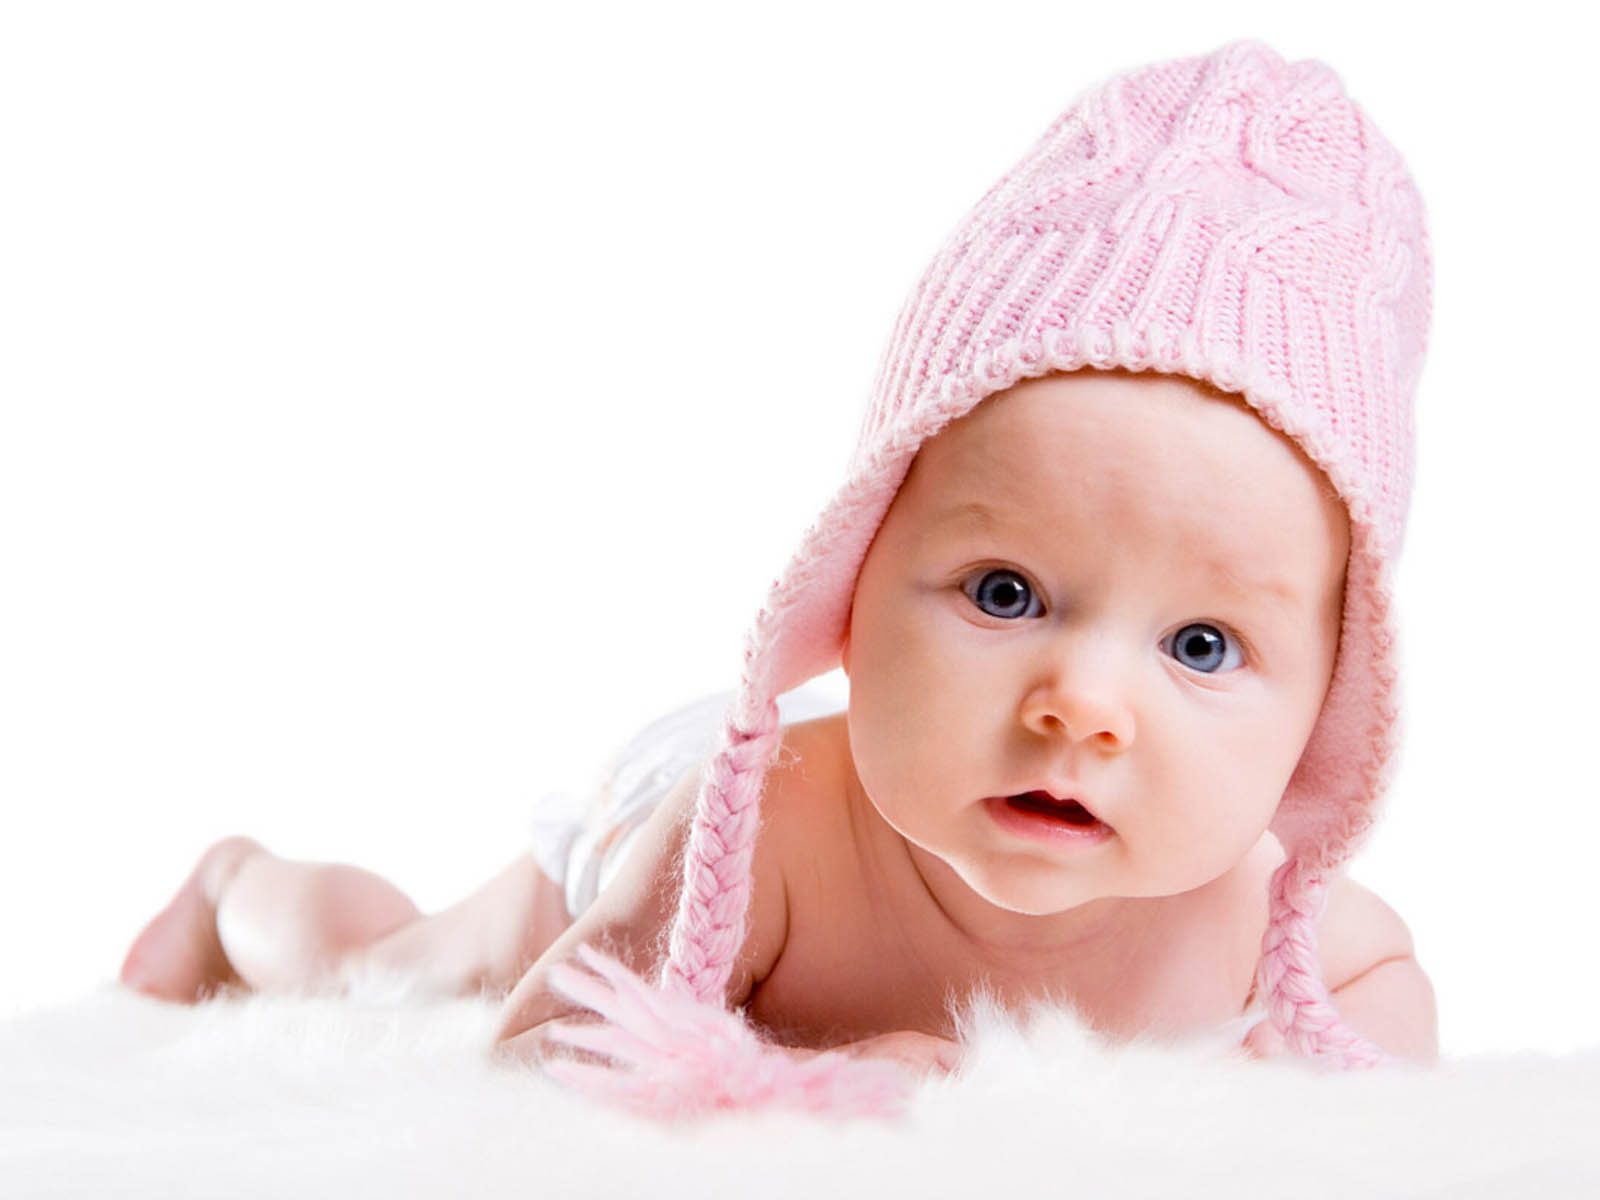 Baby Wallpaper Image Photos Pictures And Background For